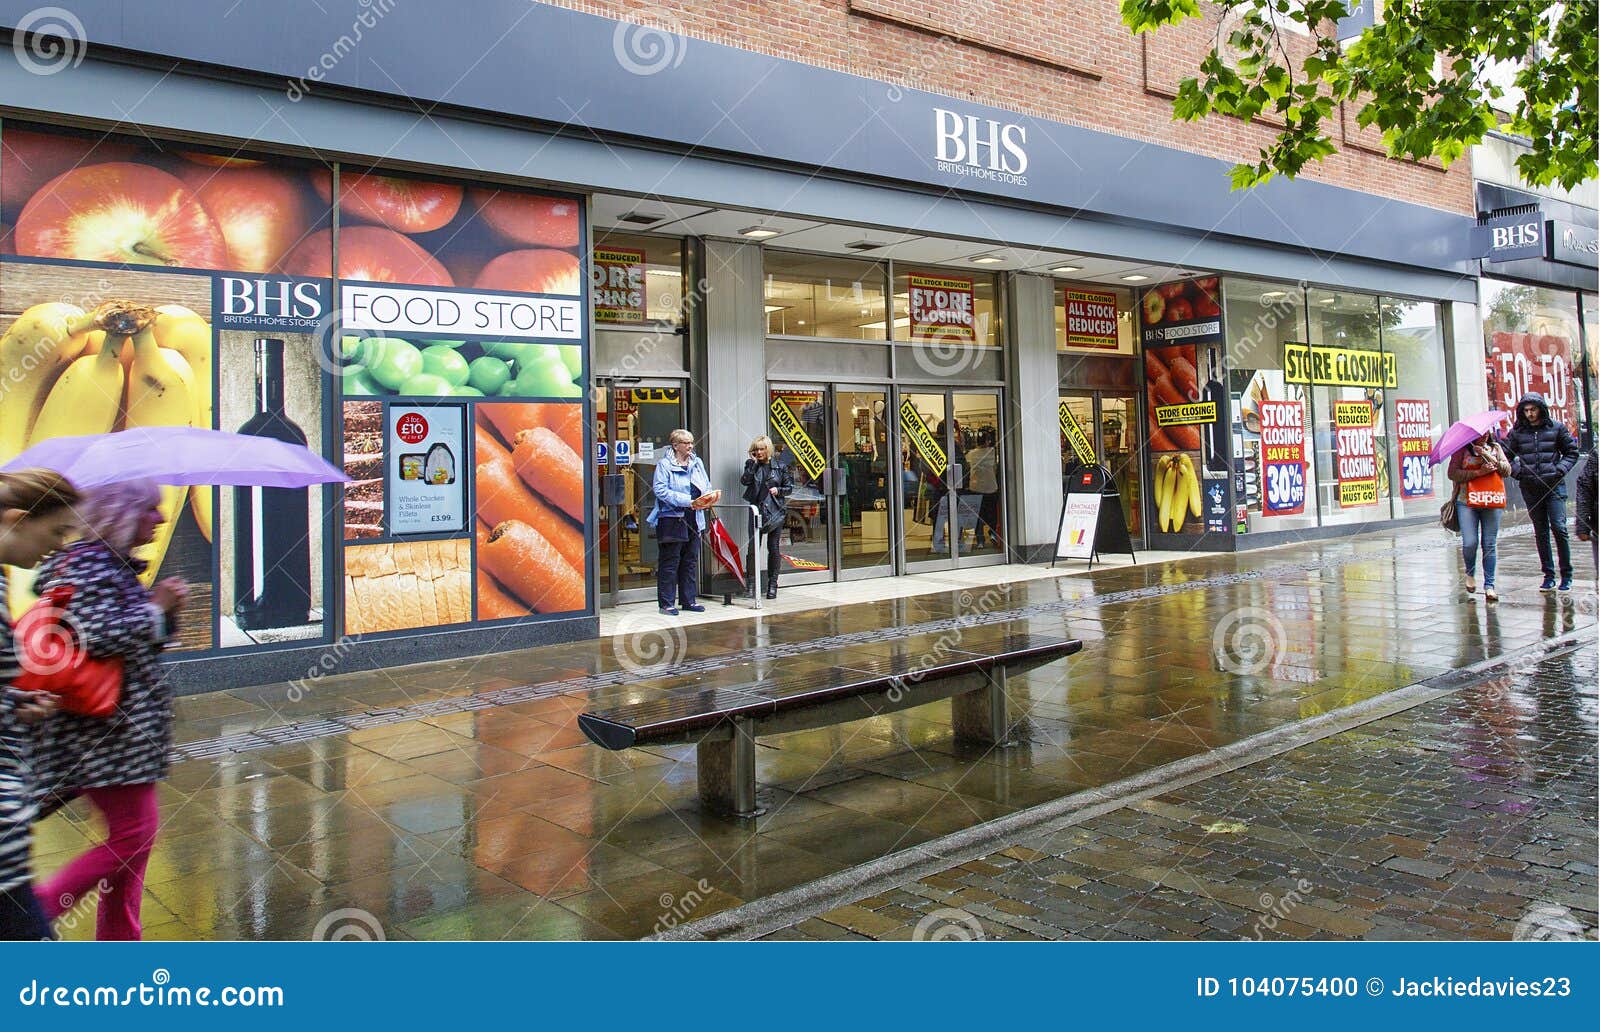 British Home Stores Closing Down Editorial Image Image Of